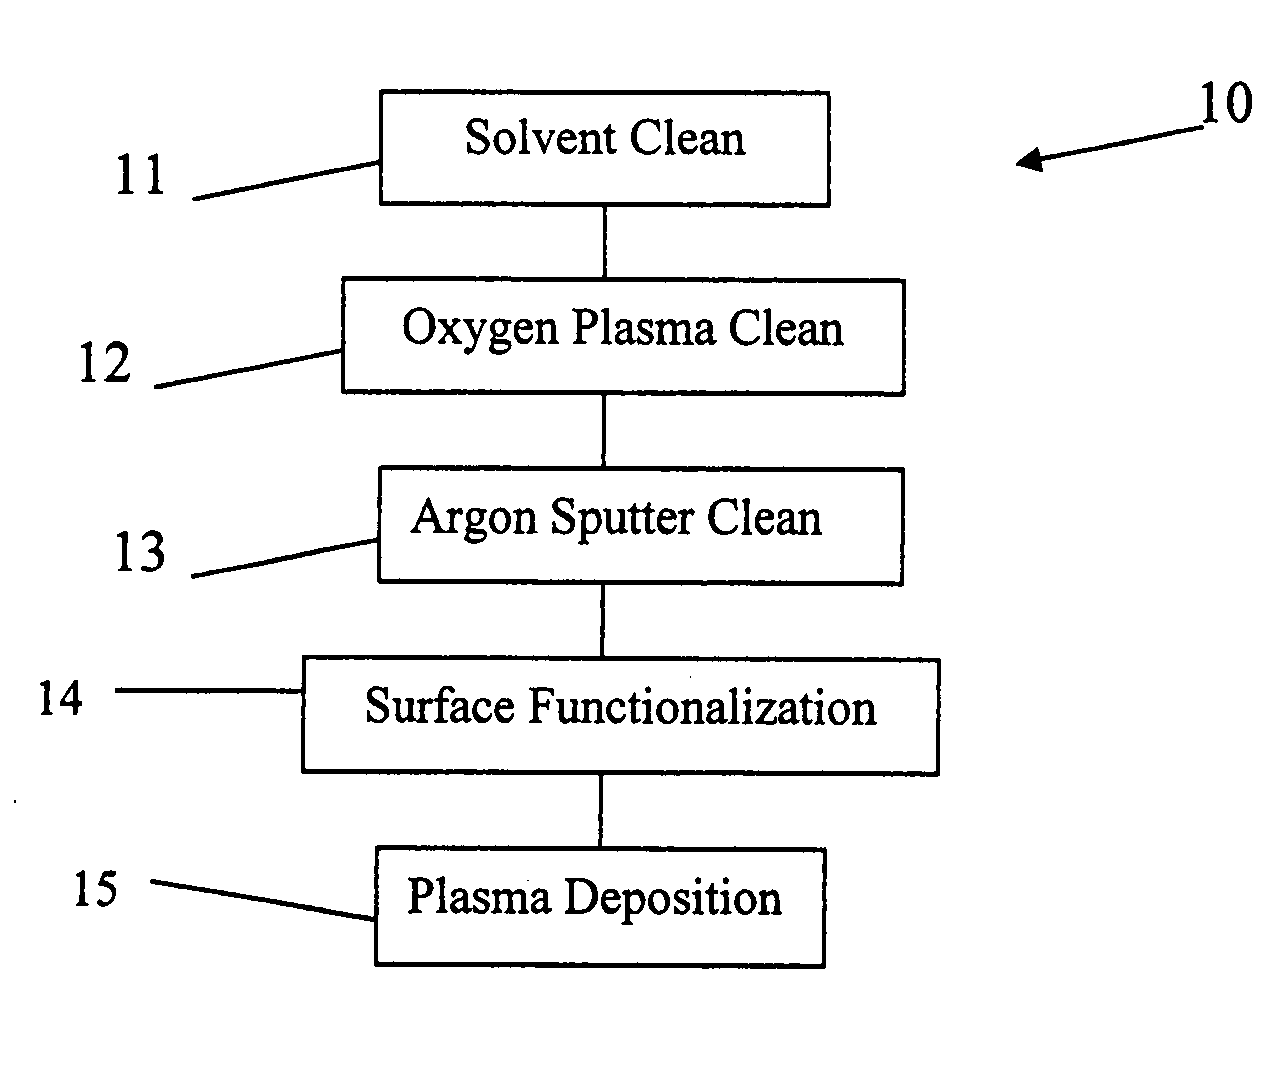 Method of forming a polymer layer on a metal surface